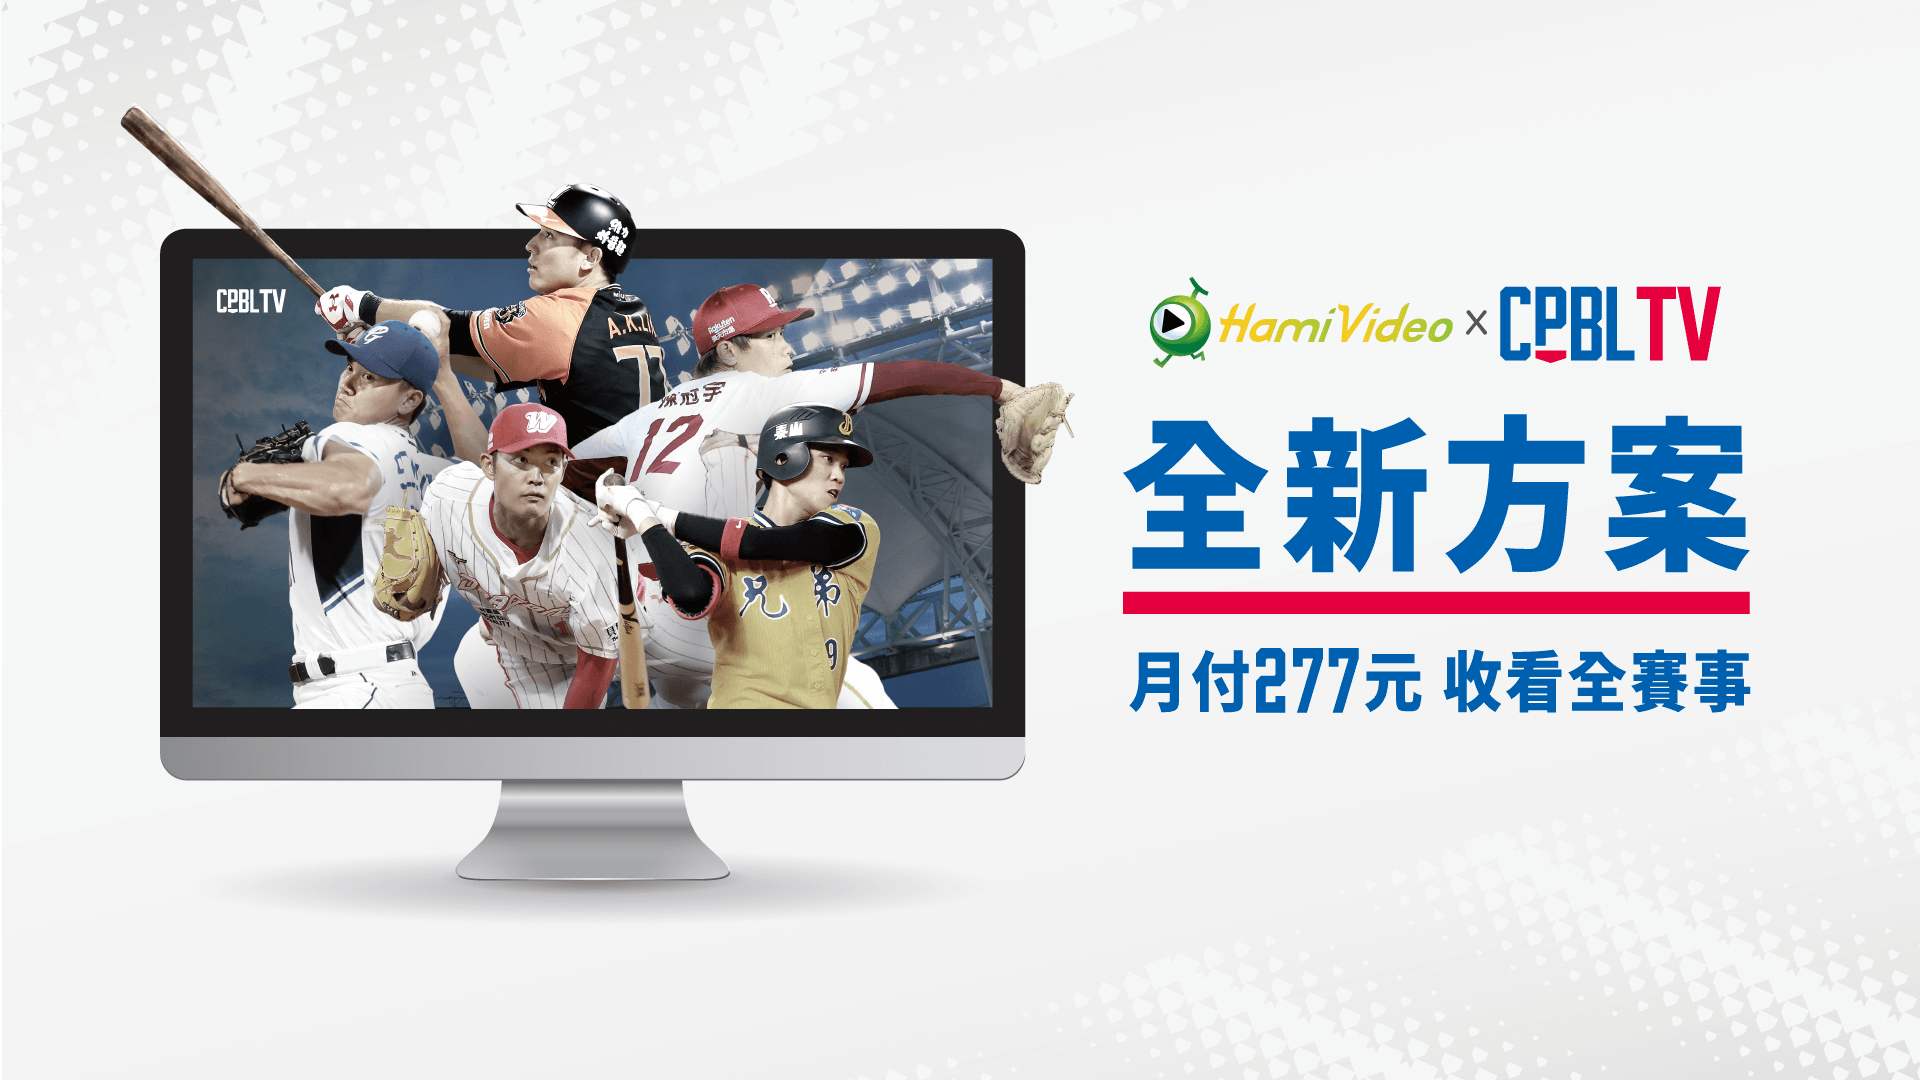 cpbl live